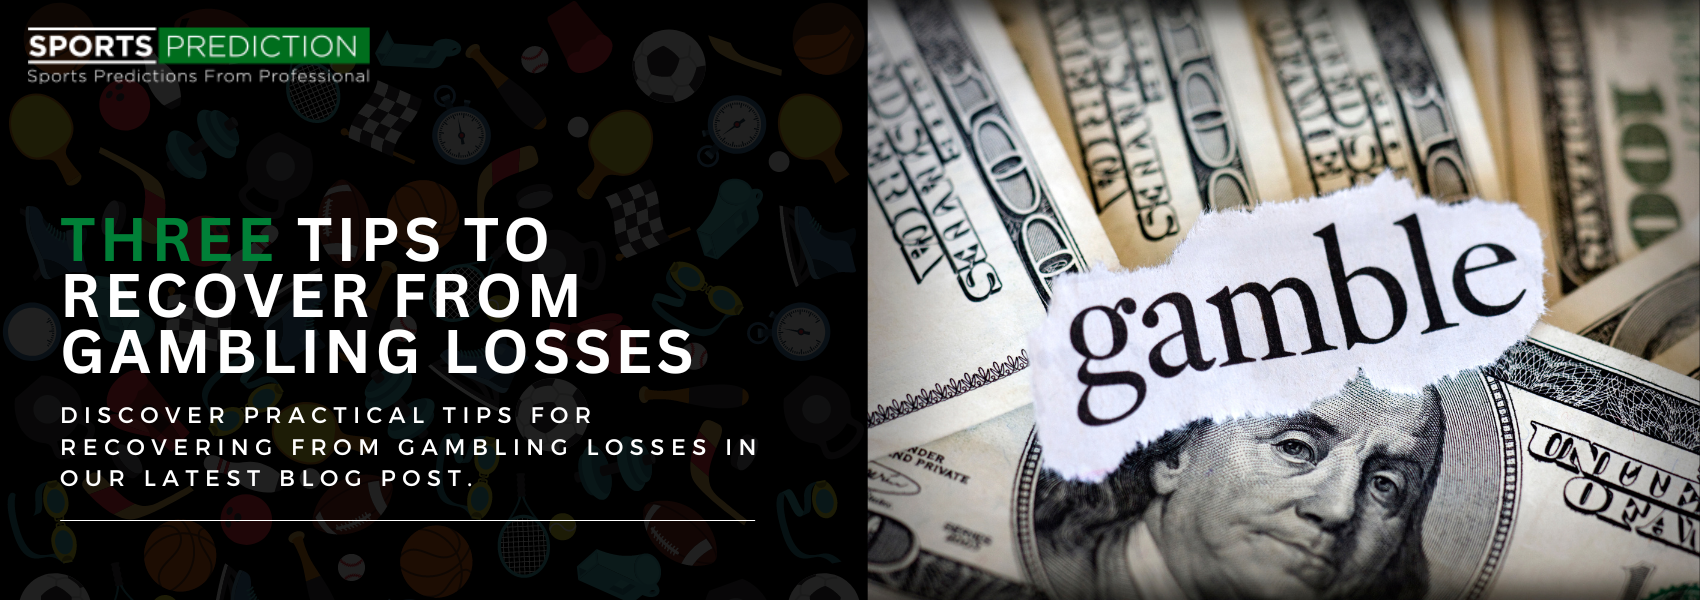 3 Tips To Recover From Gambling Losses